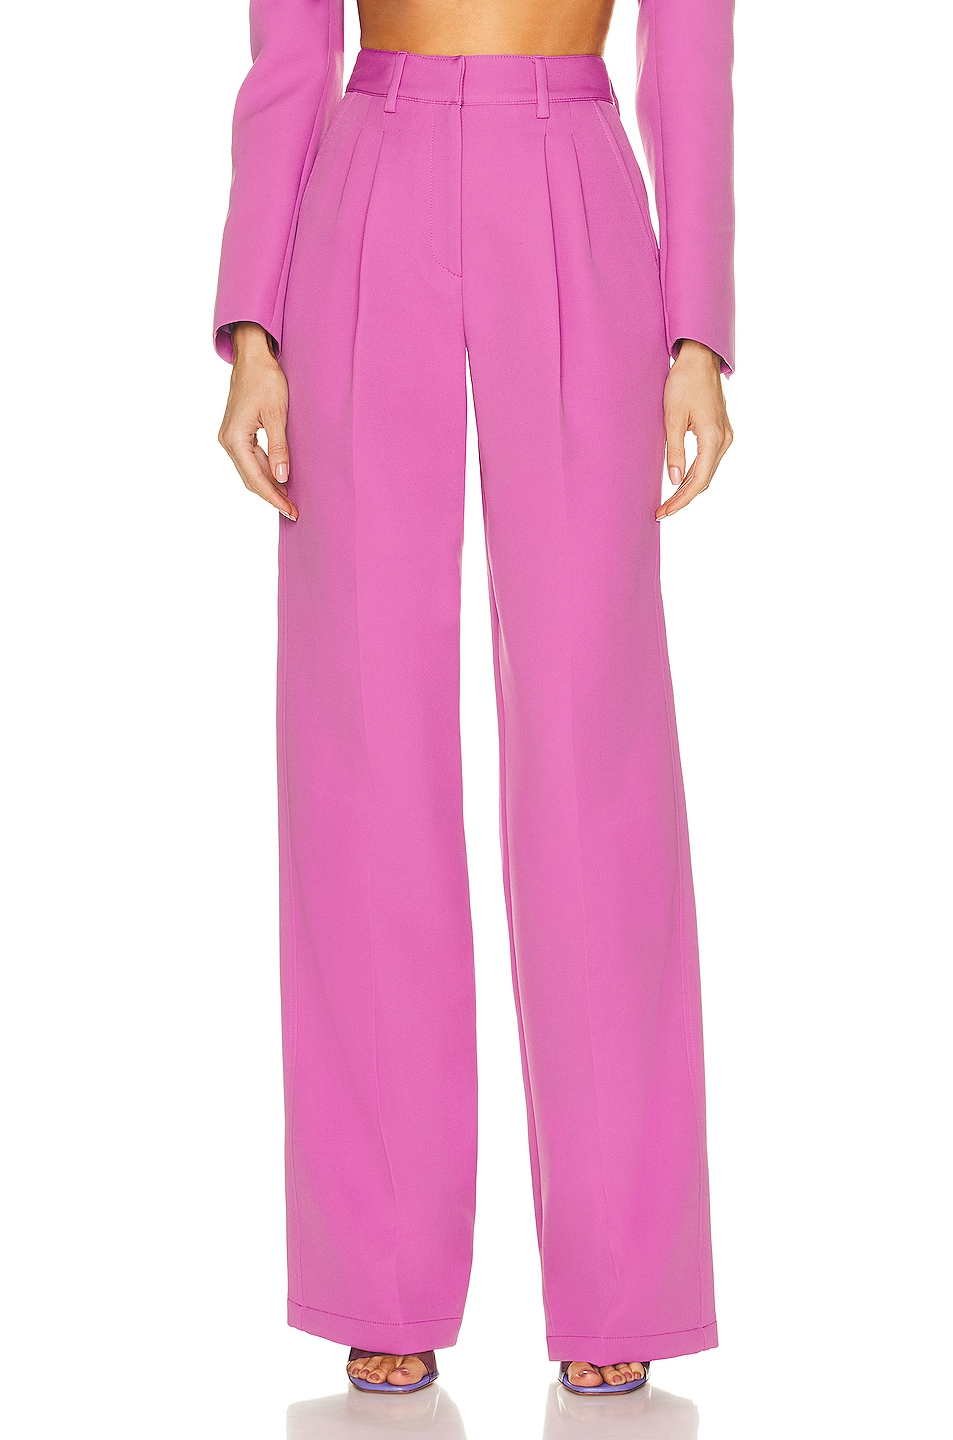 AKNVAS O'connor Pant in Orchid | FWRD